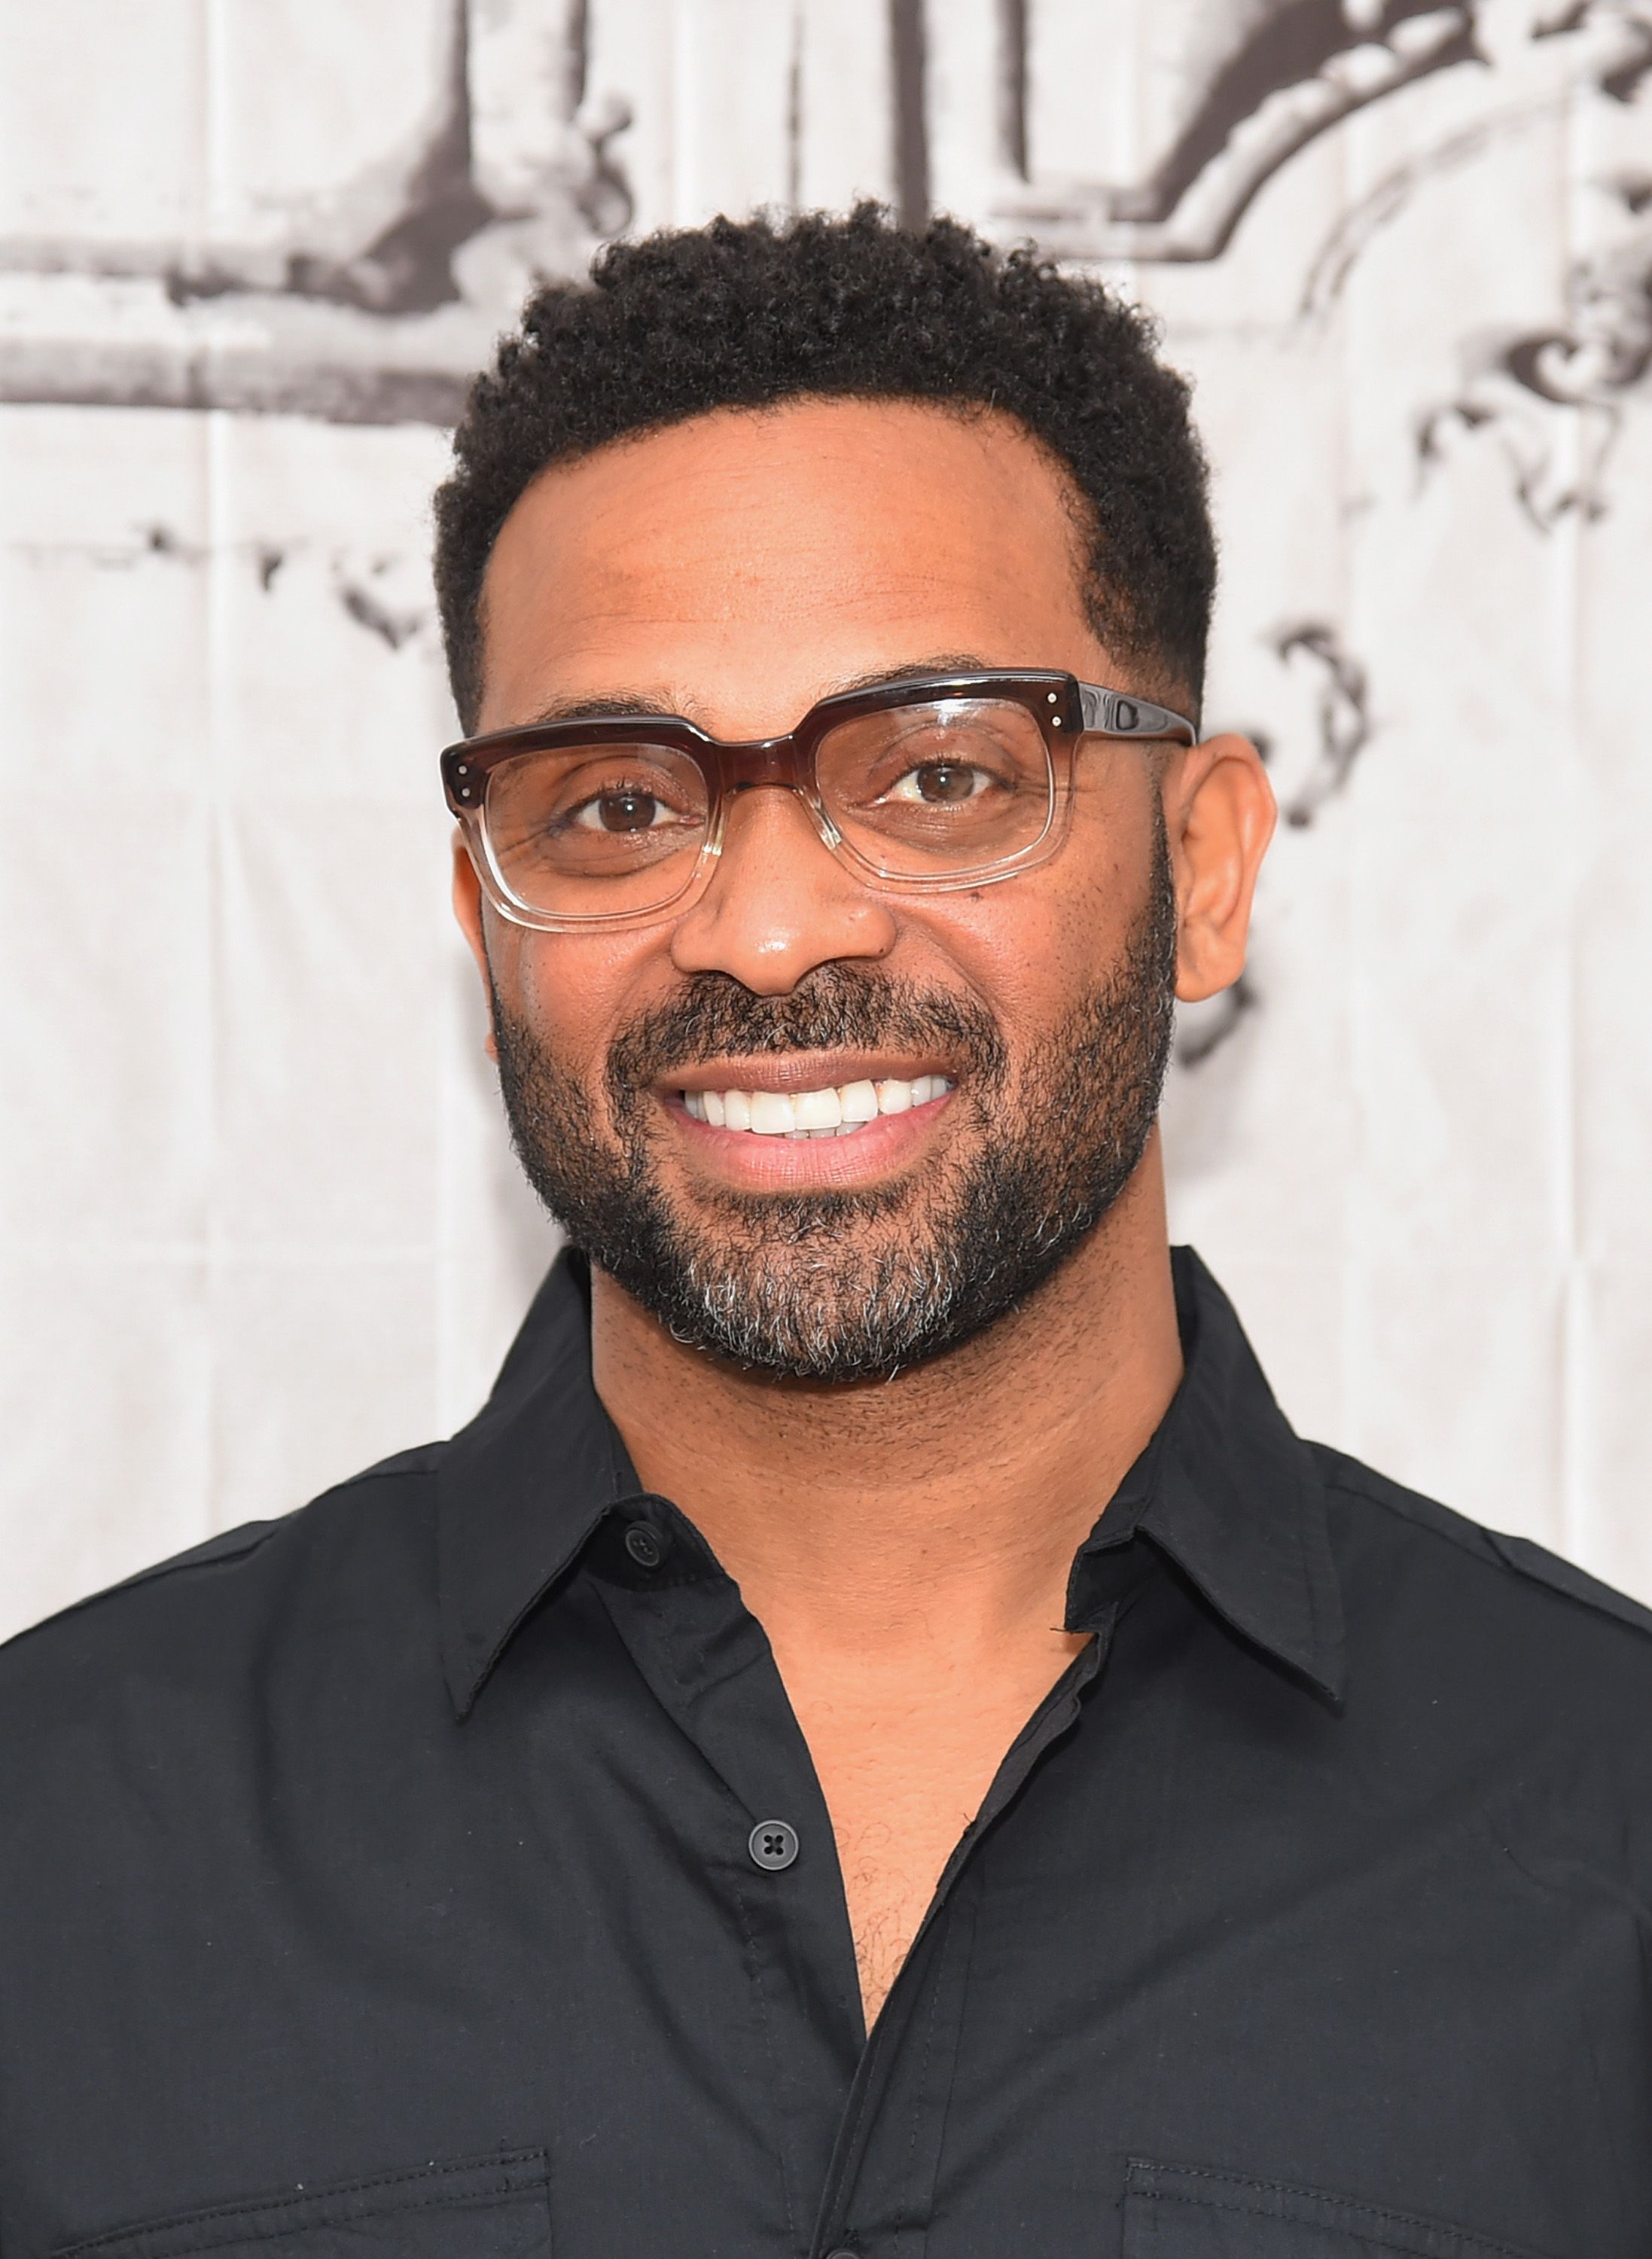 Mike Epps at the "AOL BUILD Speaker Series Presents: Survivor's Remorse" at AOL Studios in New York on July 29, 2015 in New York City | Photo: Getty Images